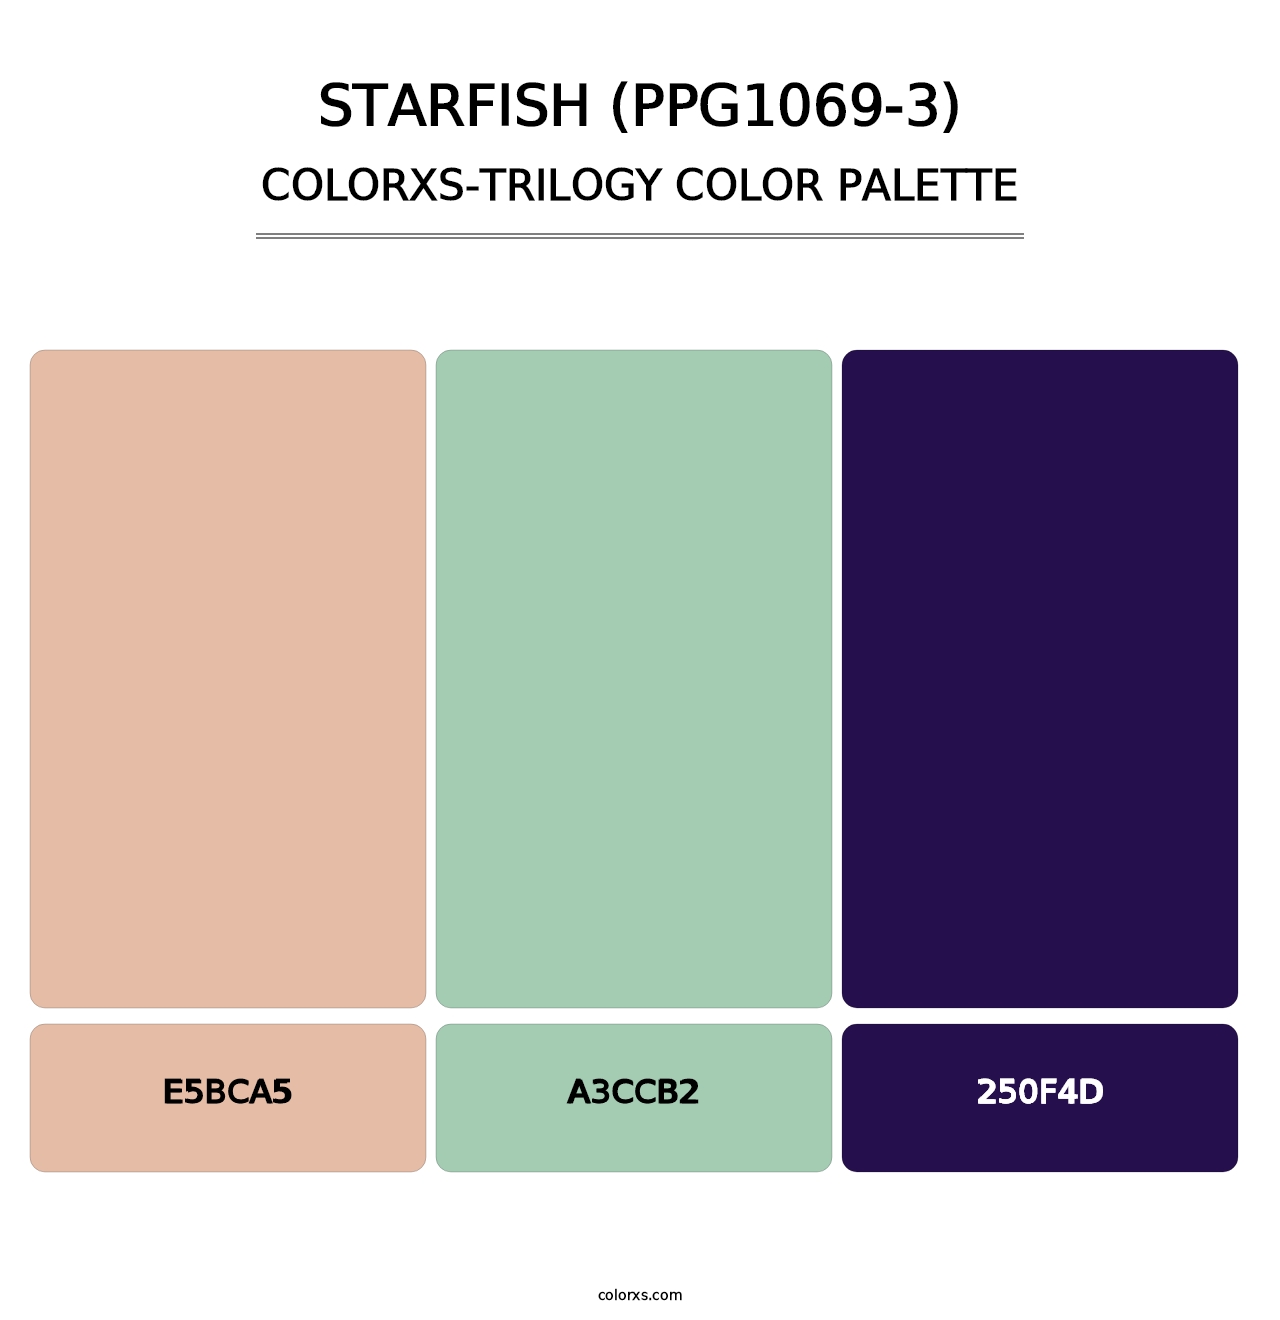 Starfish (PPG1069-3) - Colorxs Trilogy Palette